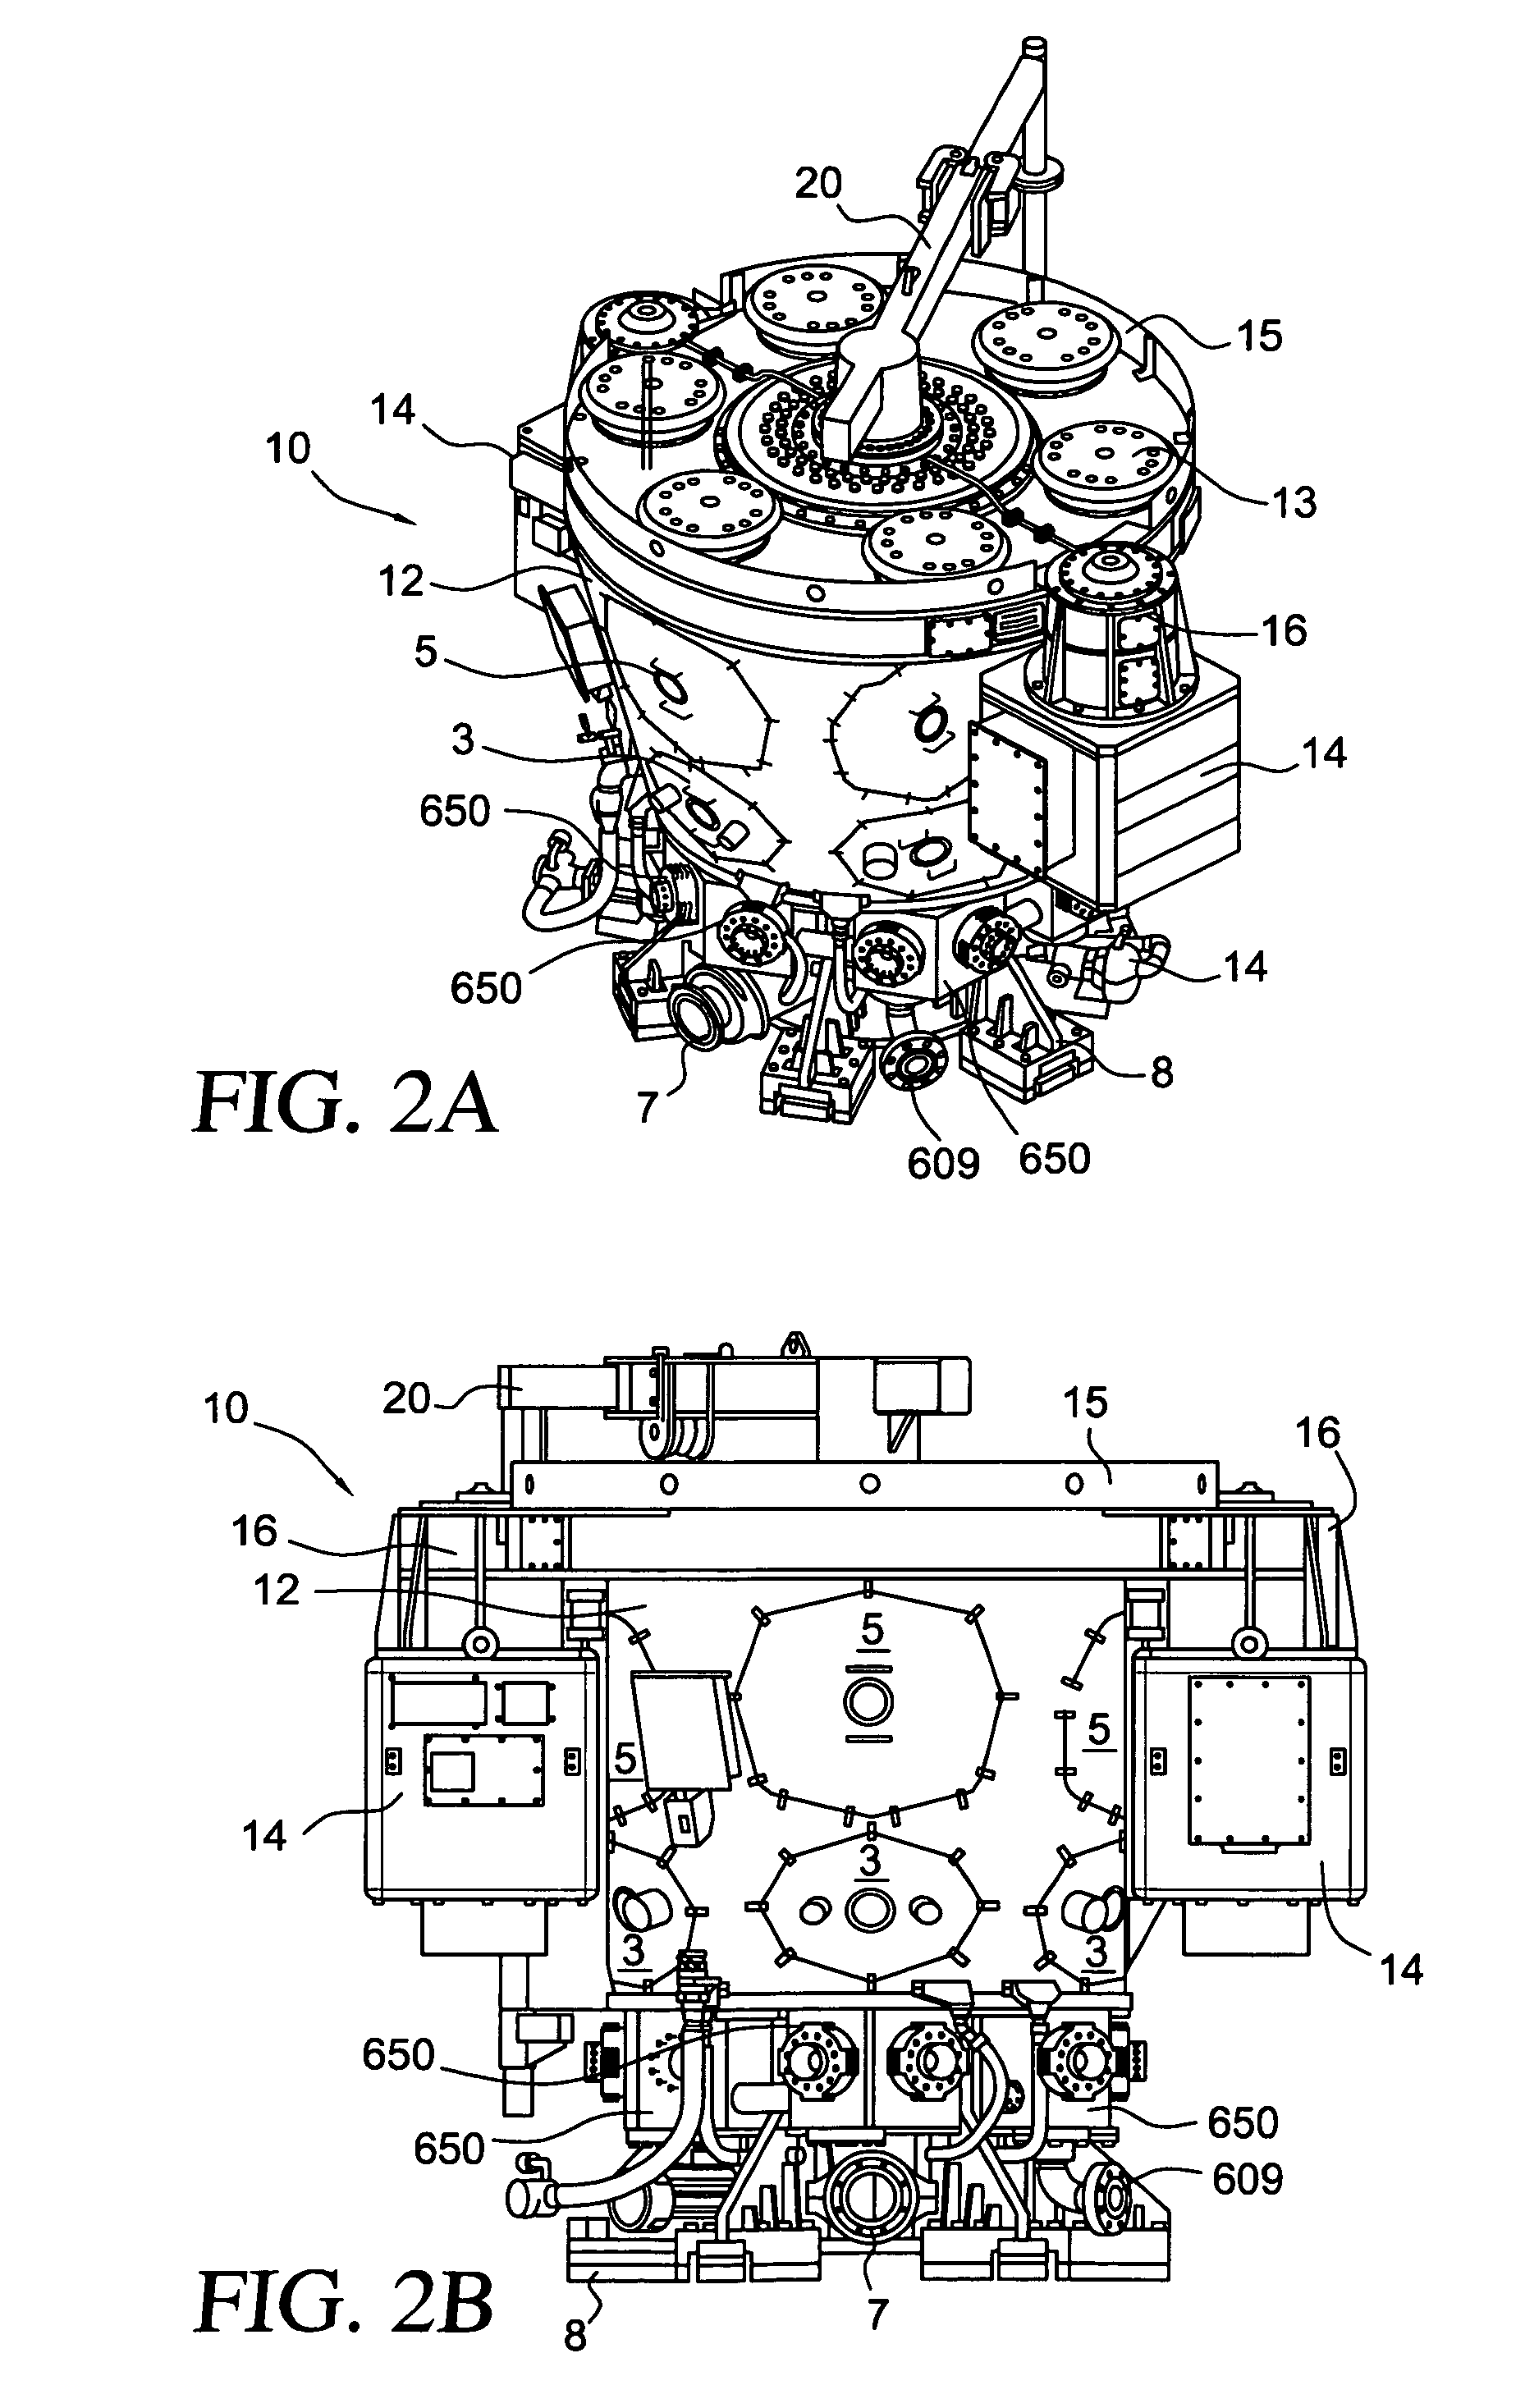 Mud pump systems for wellbore operations